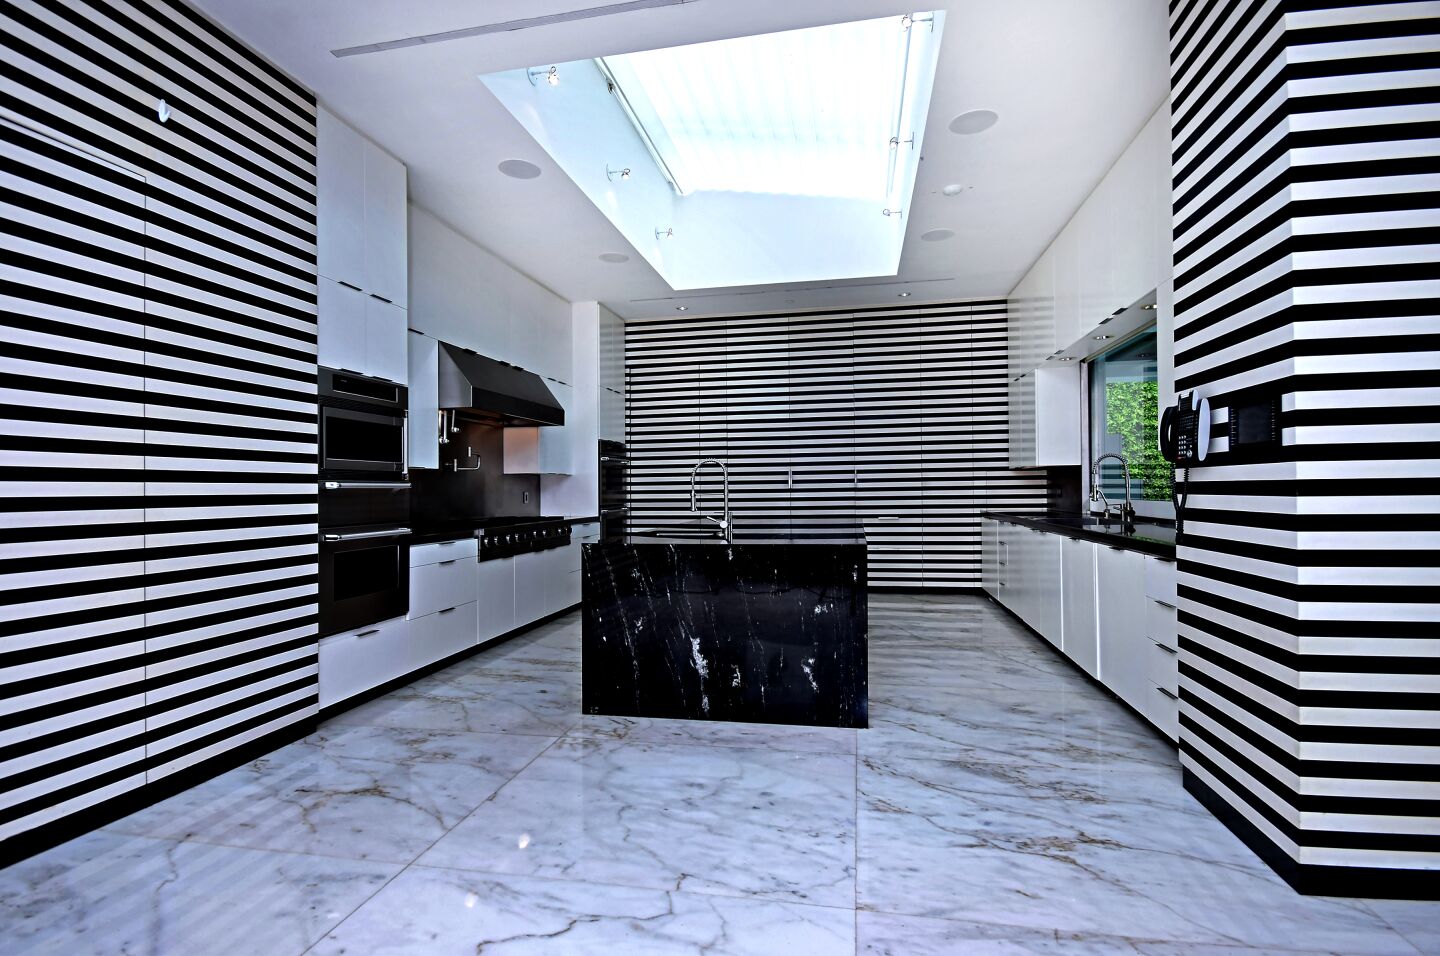 Singer Gwen Stefani sold her contemporary-style compound in the Beverly Hills Post Office area to stand-up comic Sebastian Maniscalco for $21.65 million. The 11,845-square-foot spread, which was once owned by Jennifer Lopez, features bold splashes of color, book-matched marble slabs and a black-and-white striped kitchen. The property sits on about two acres and has a swimming pool, a tennis court and a playground. At the far end of the property is a chicken coop.